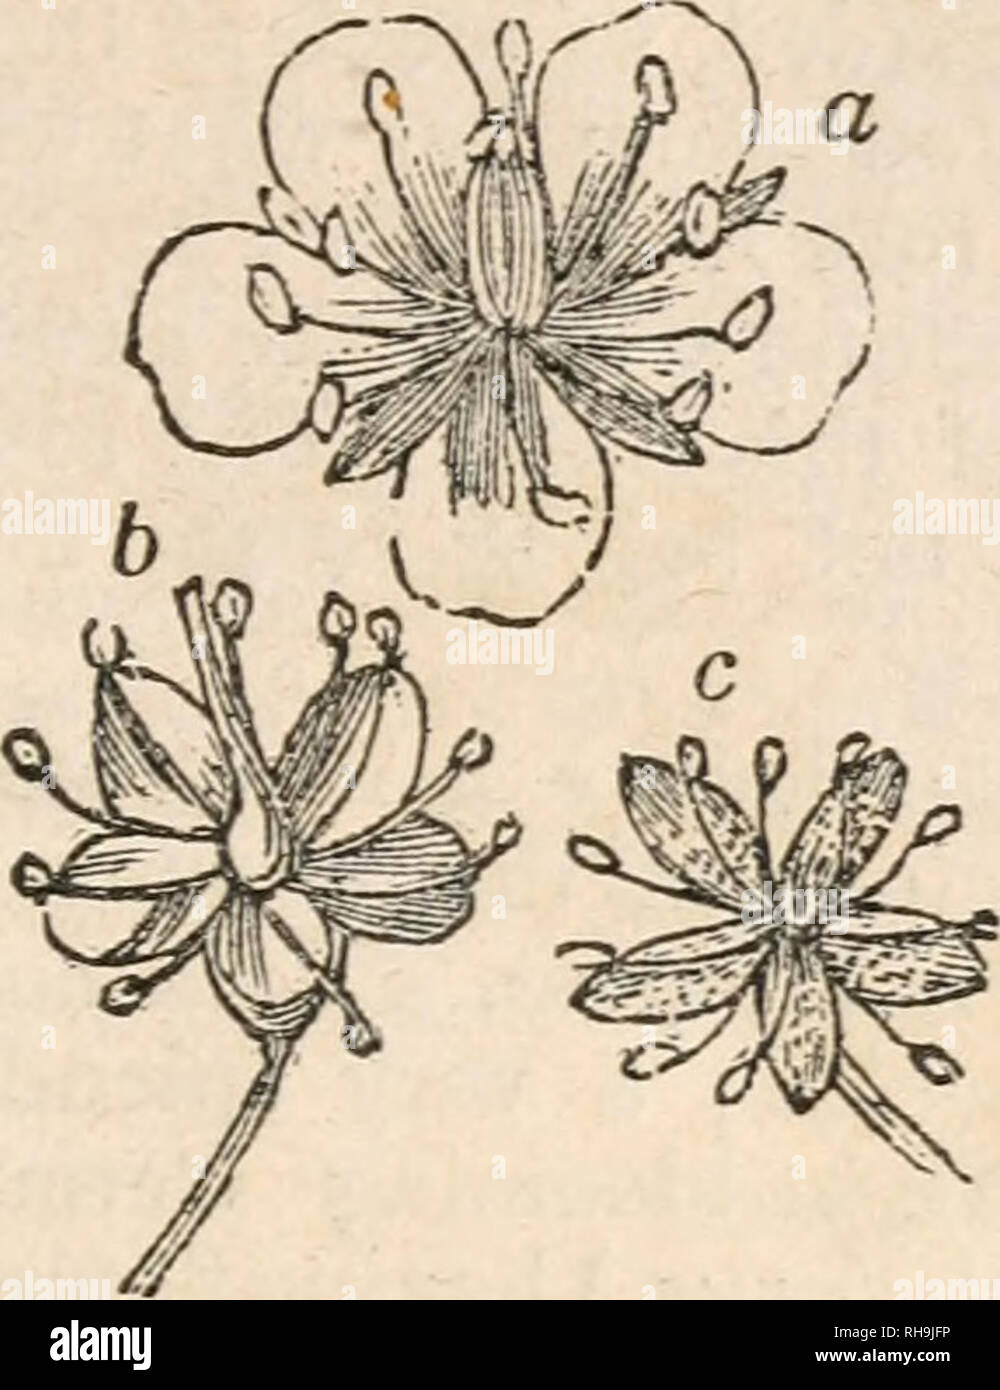 . Botany for beginners : an introduction to Mrs. Lincoln's Lectures on botany : for the use of common schools and the younger pupils of higher schools and academies. Botany. Ch. XXIIL] CLASSES AND OHDCKS. 137 CLASS X. DECANDRIA, tt&gt;n stamens ORDER 1. MONOGYNIA, one pistil. Fig. 81. 579. This cut represents at a, a flow- er of the genus Ruta, (ruu;) its calyx is monosepalous ; it has five petals; the germ is large and superior. At &amp; is a flower of the Saxifraga ; one species of this, sometimes called beef-steak geranium, is a very common and hardy green-house plant, with creeping roots a Stock Photo